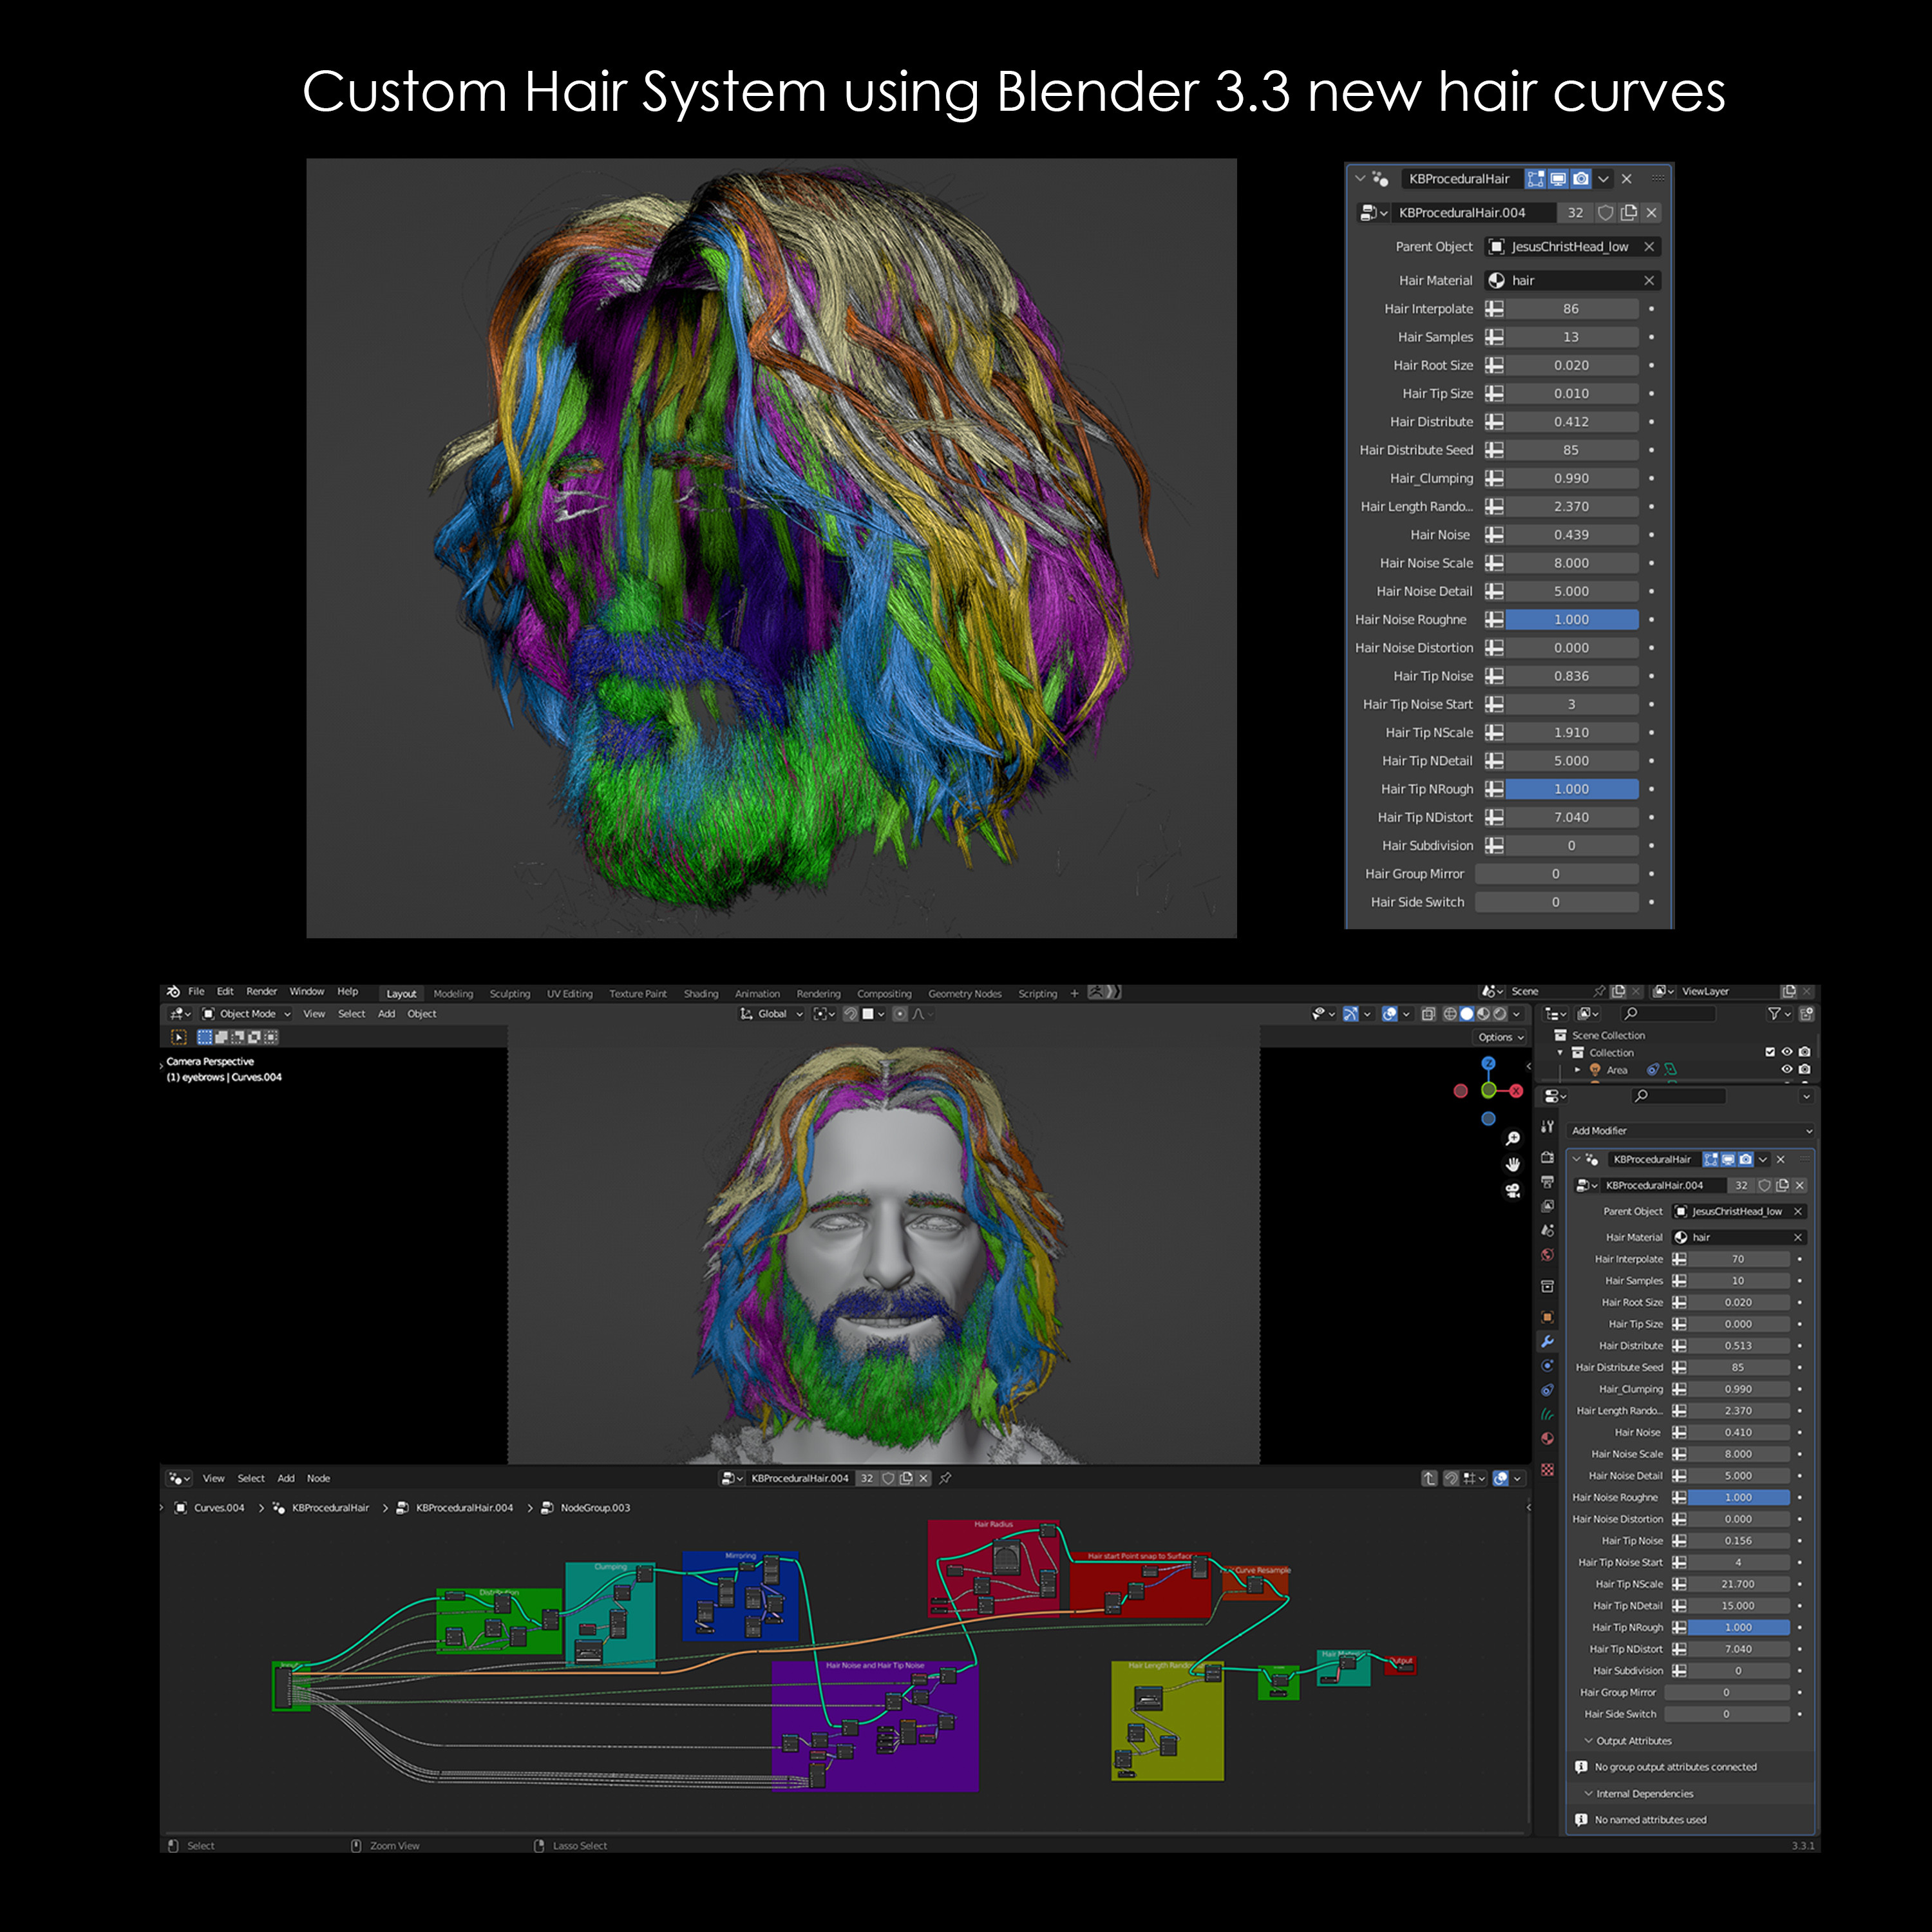 using this custom system I'm able to develop the hair in a straight forward manner. Each color coding indicated different groups of hairs. Blender new hair curve is very effiecent and fast to work with even with a dense grooming scene.